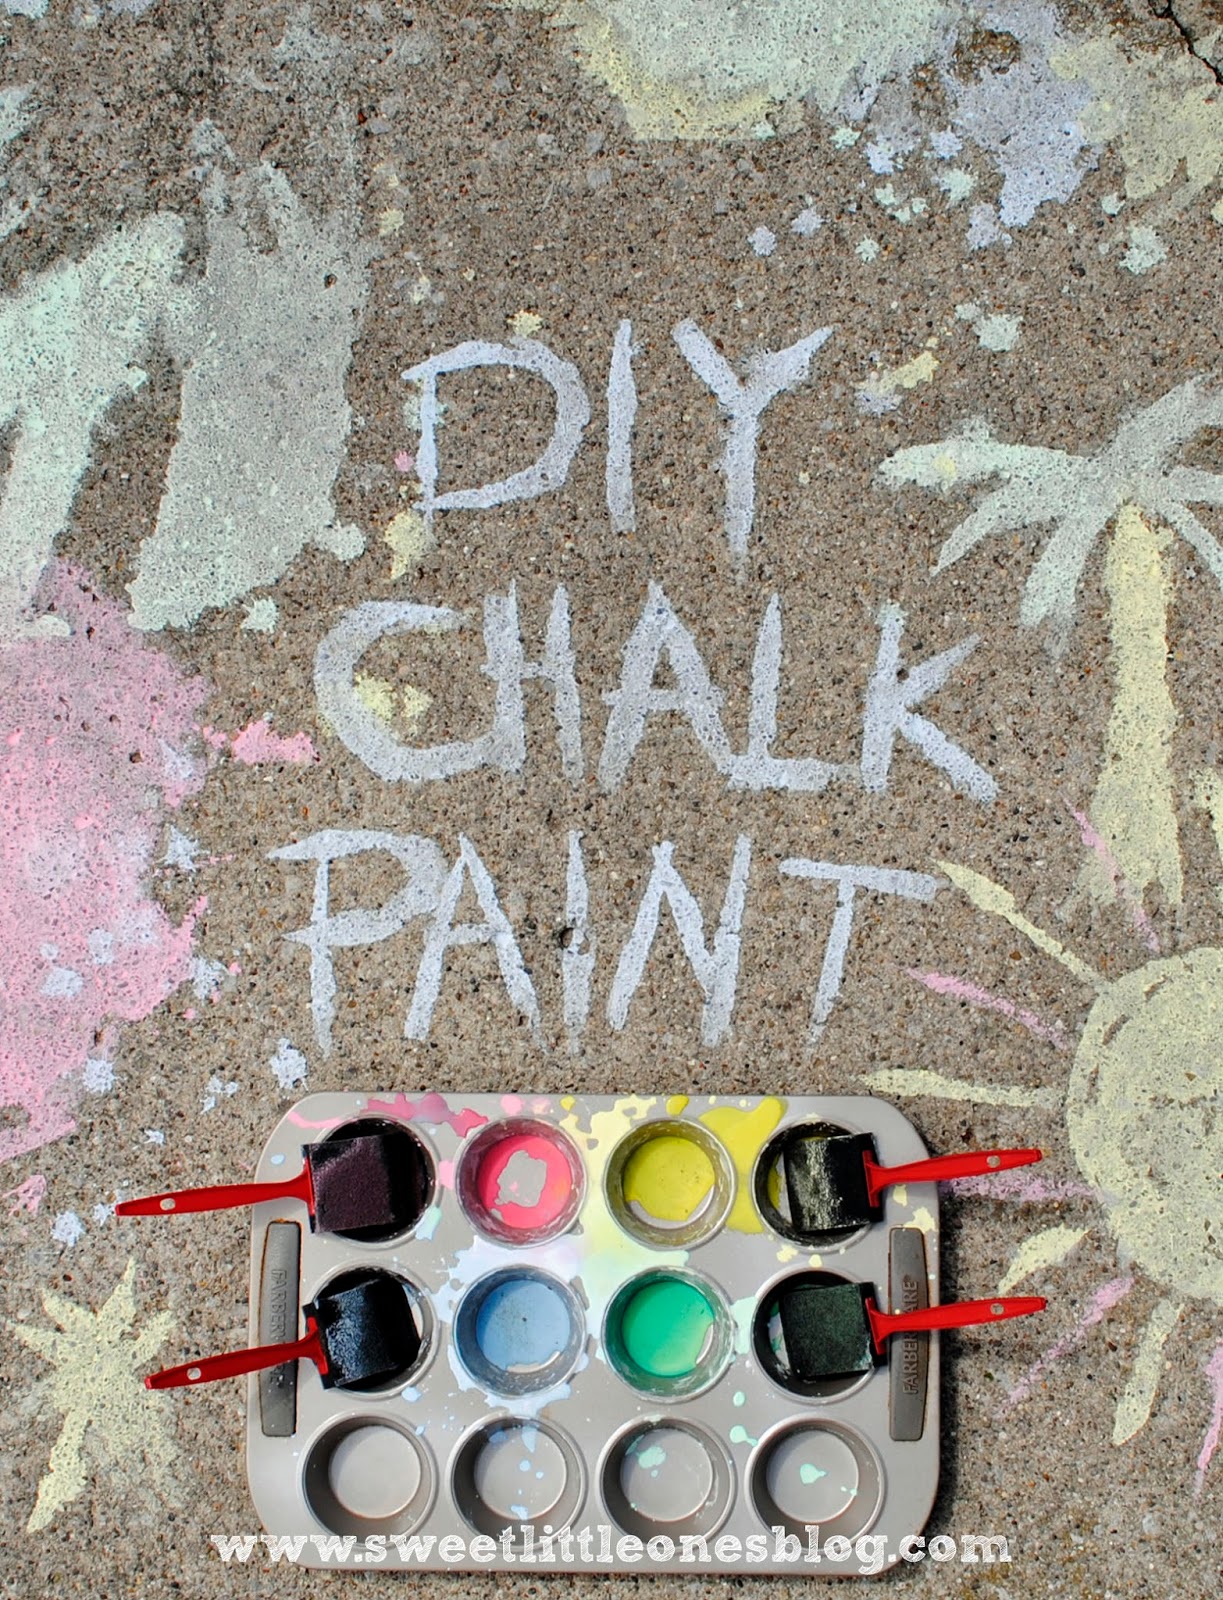 Homemade Sidewalk Chalk: An Easy and Fun Project for Kids